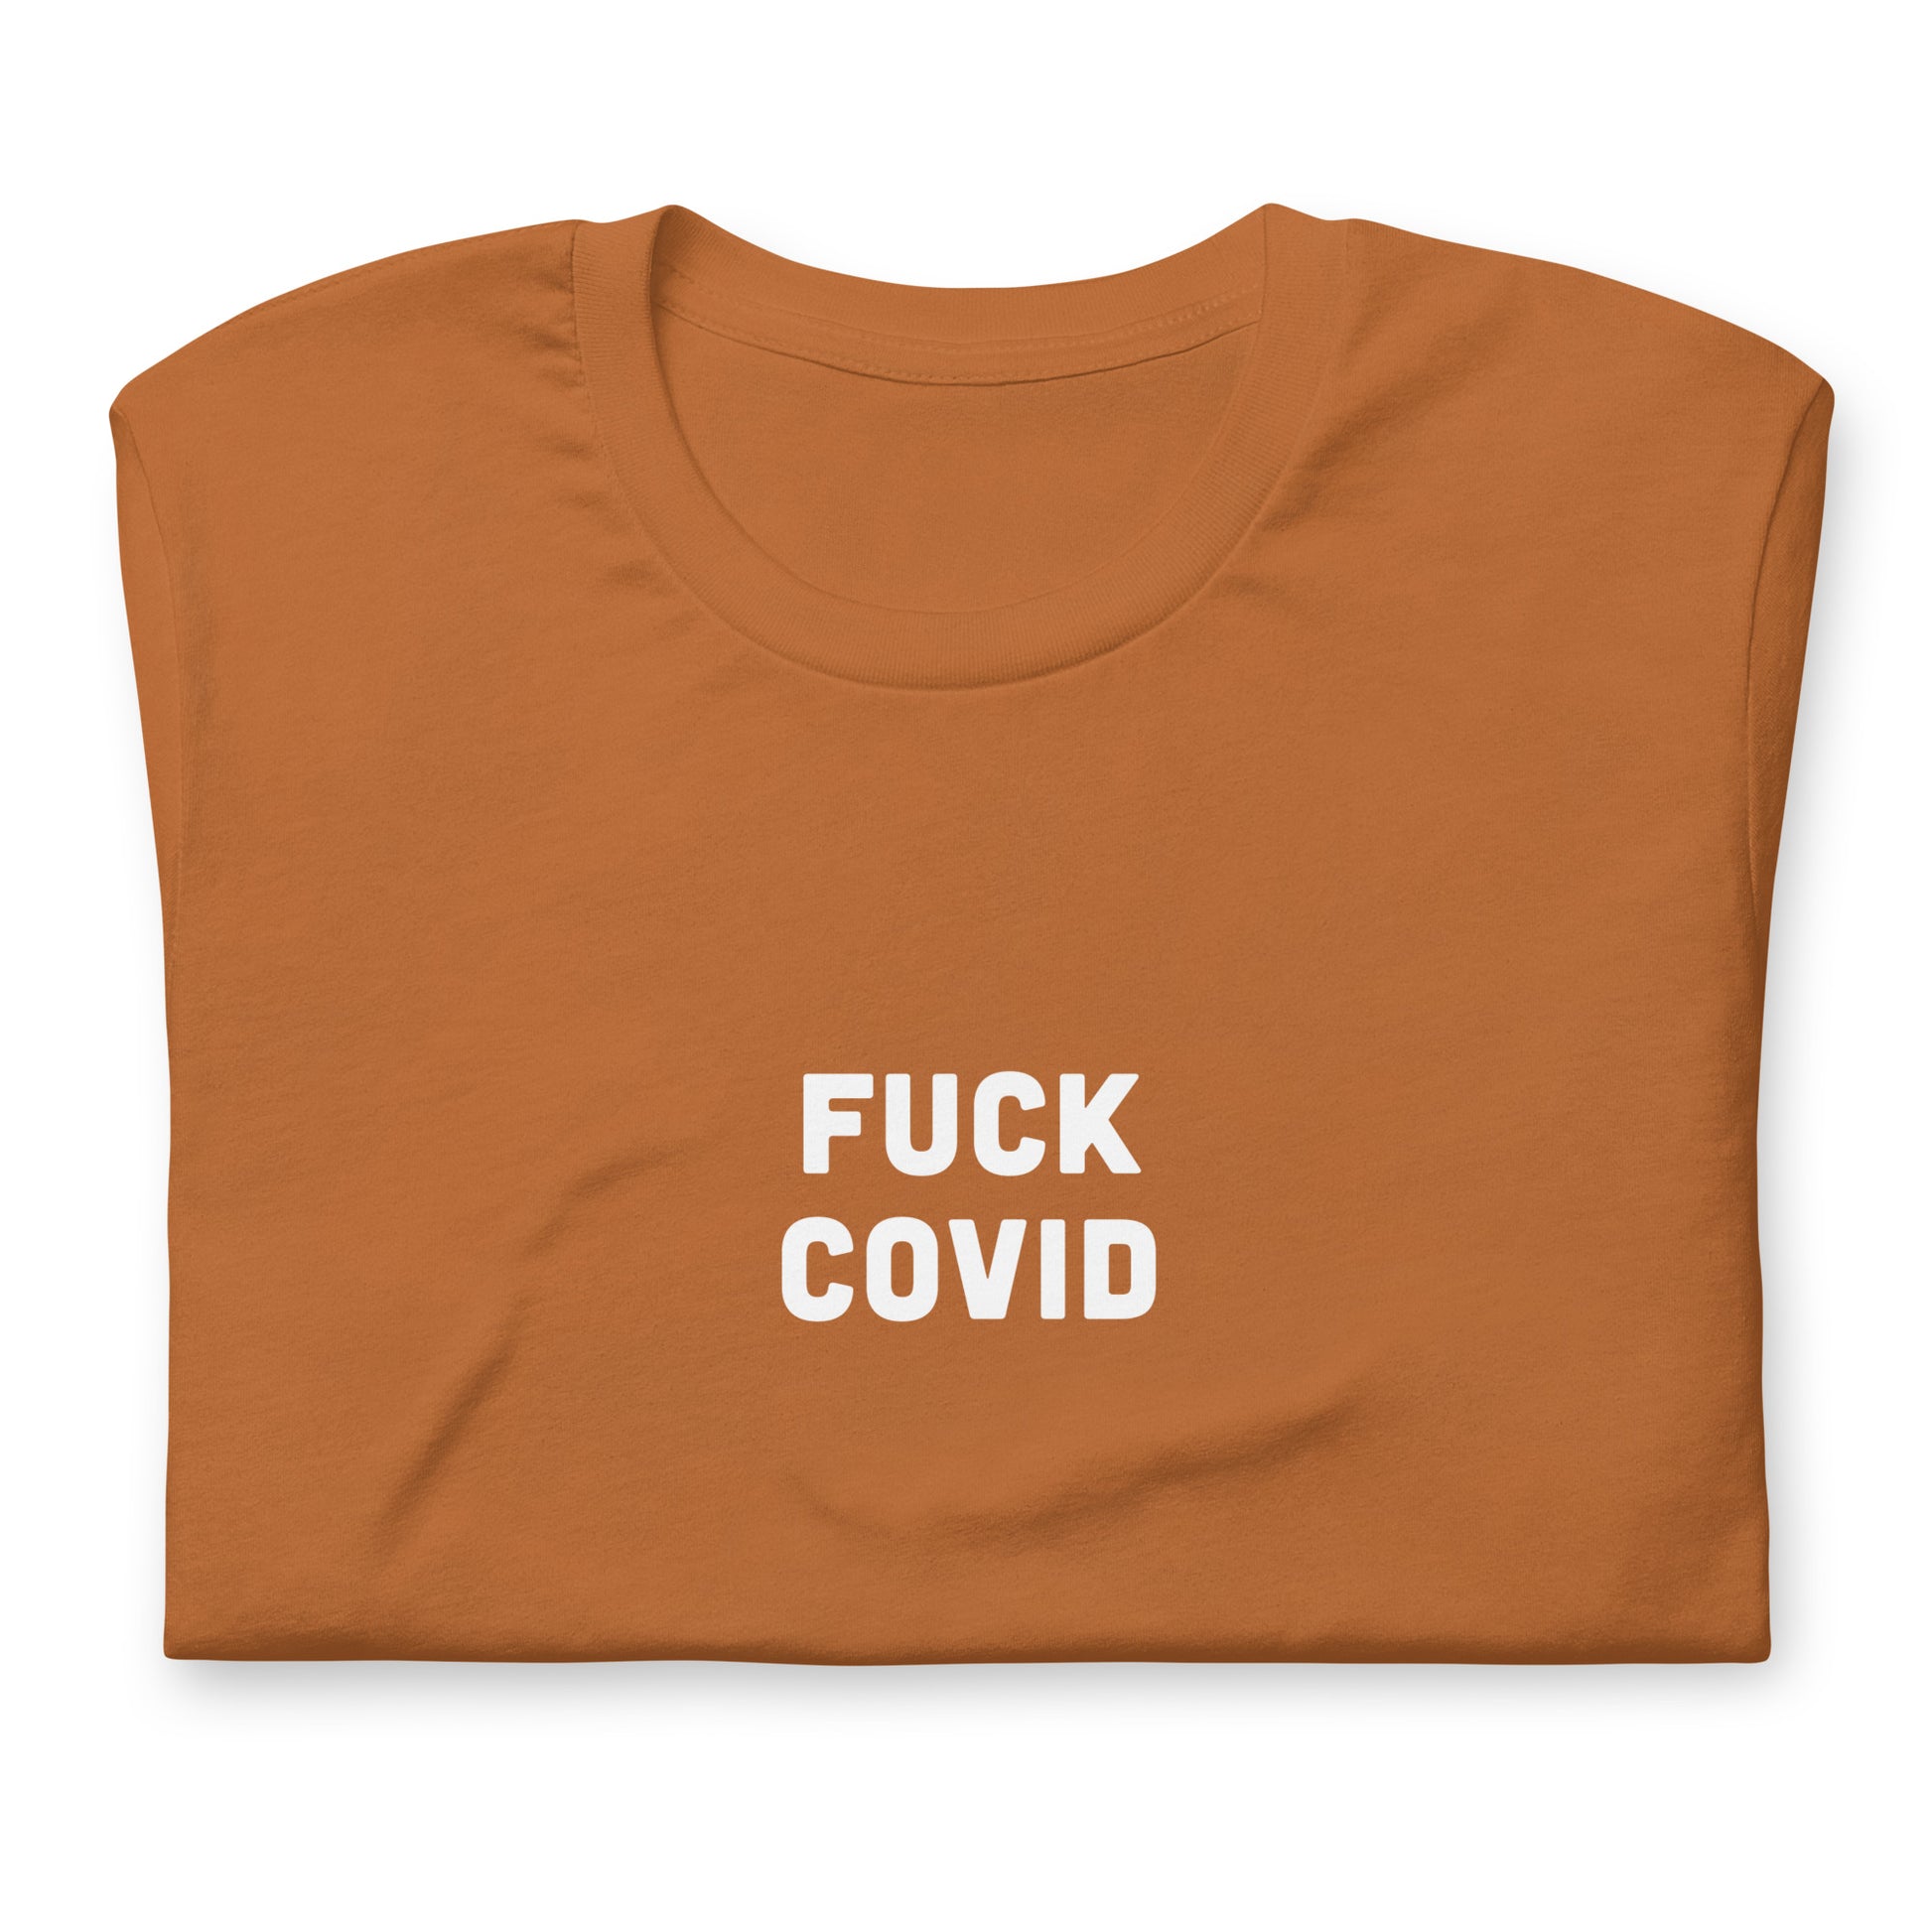 Fuck Covid T-Shirt Size XL Color Navy